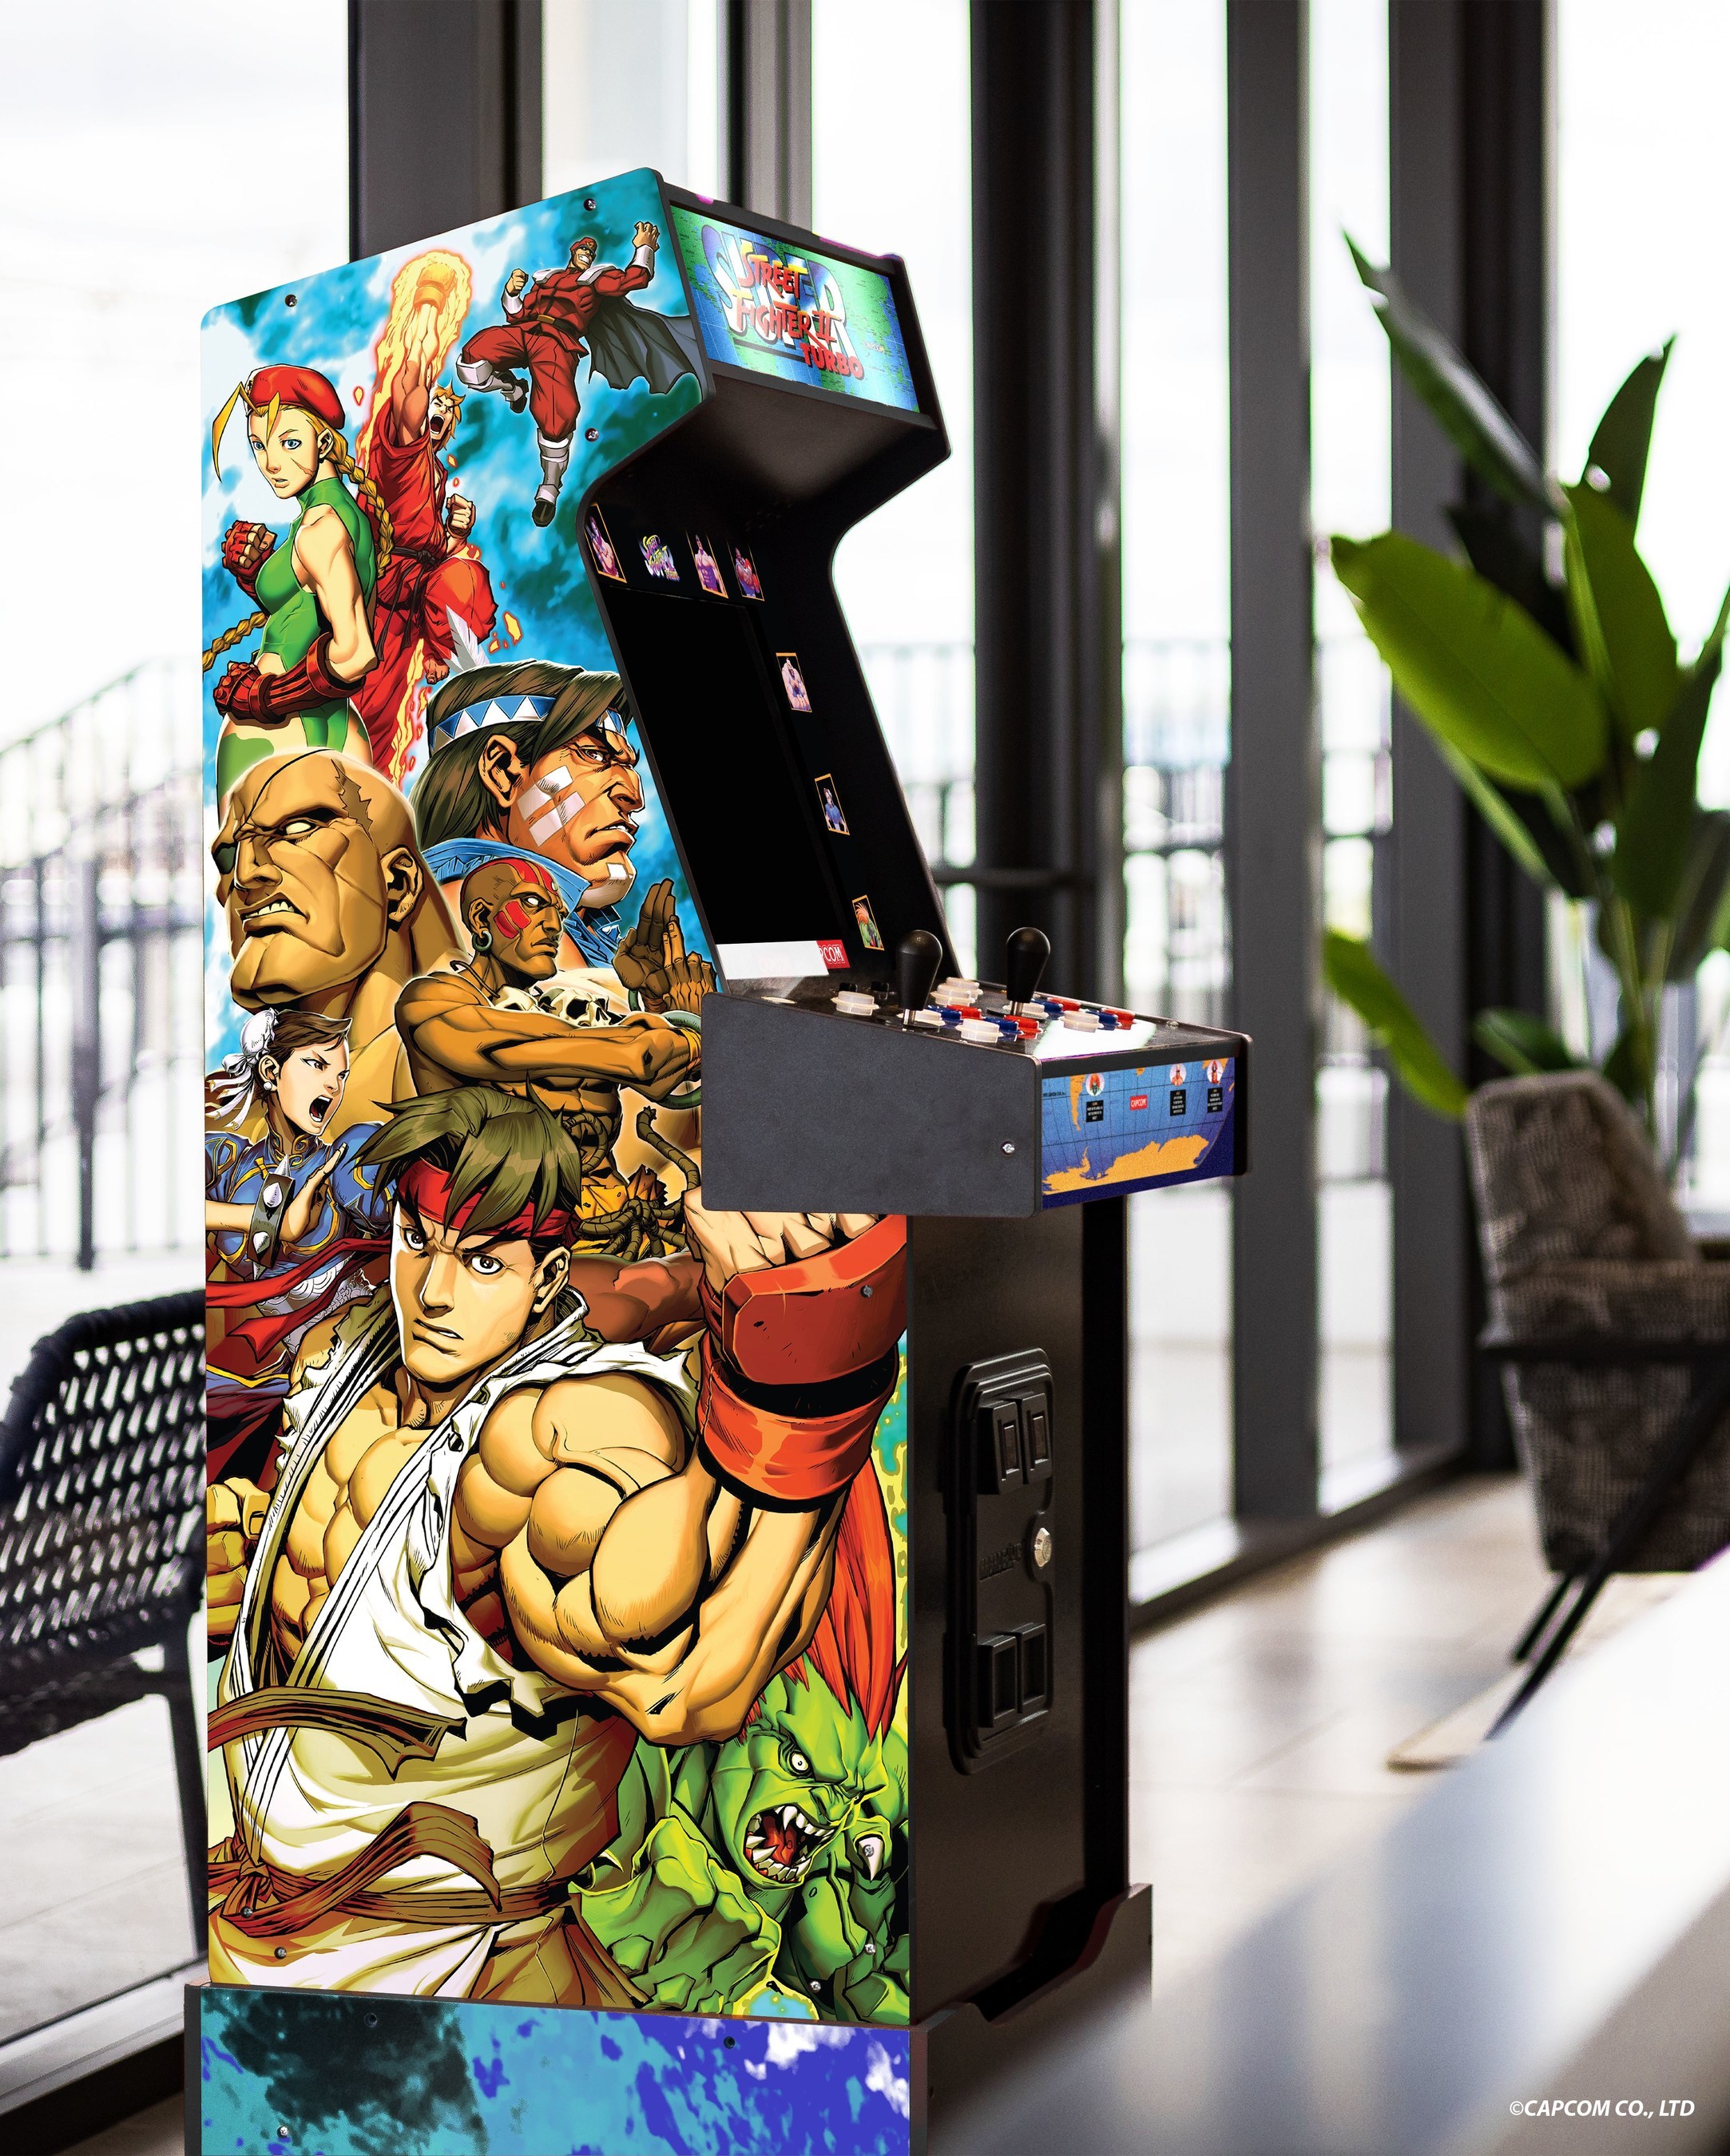 Arcade1Up Levels Up Legacy Lineup with Two New Home Arcade Machines